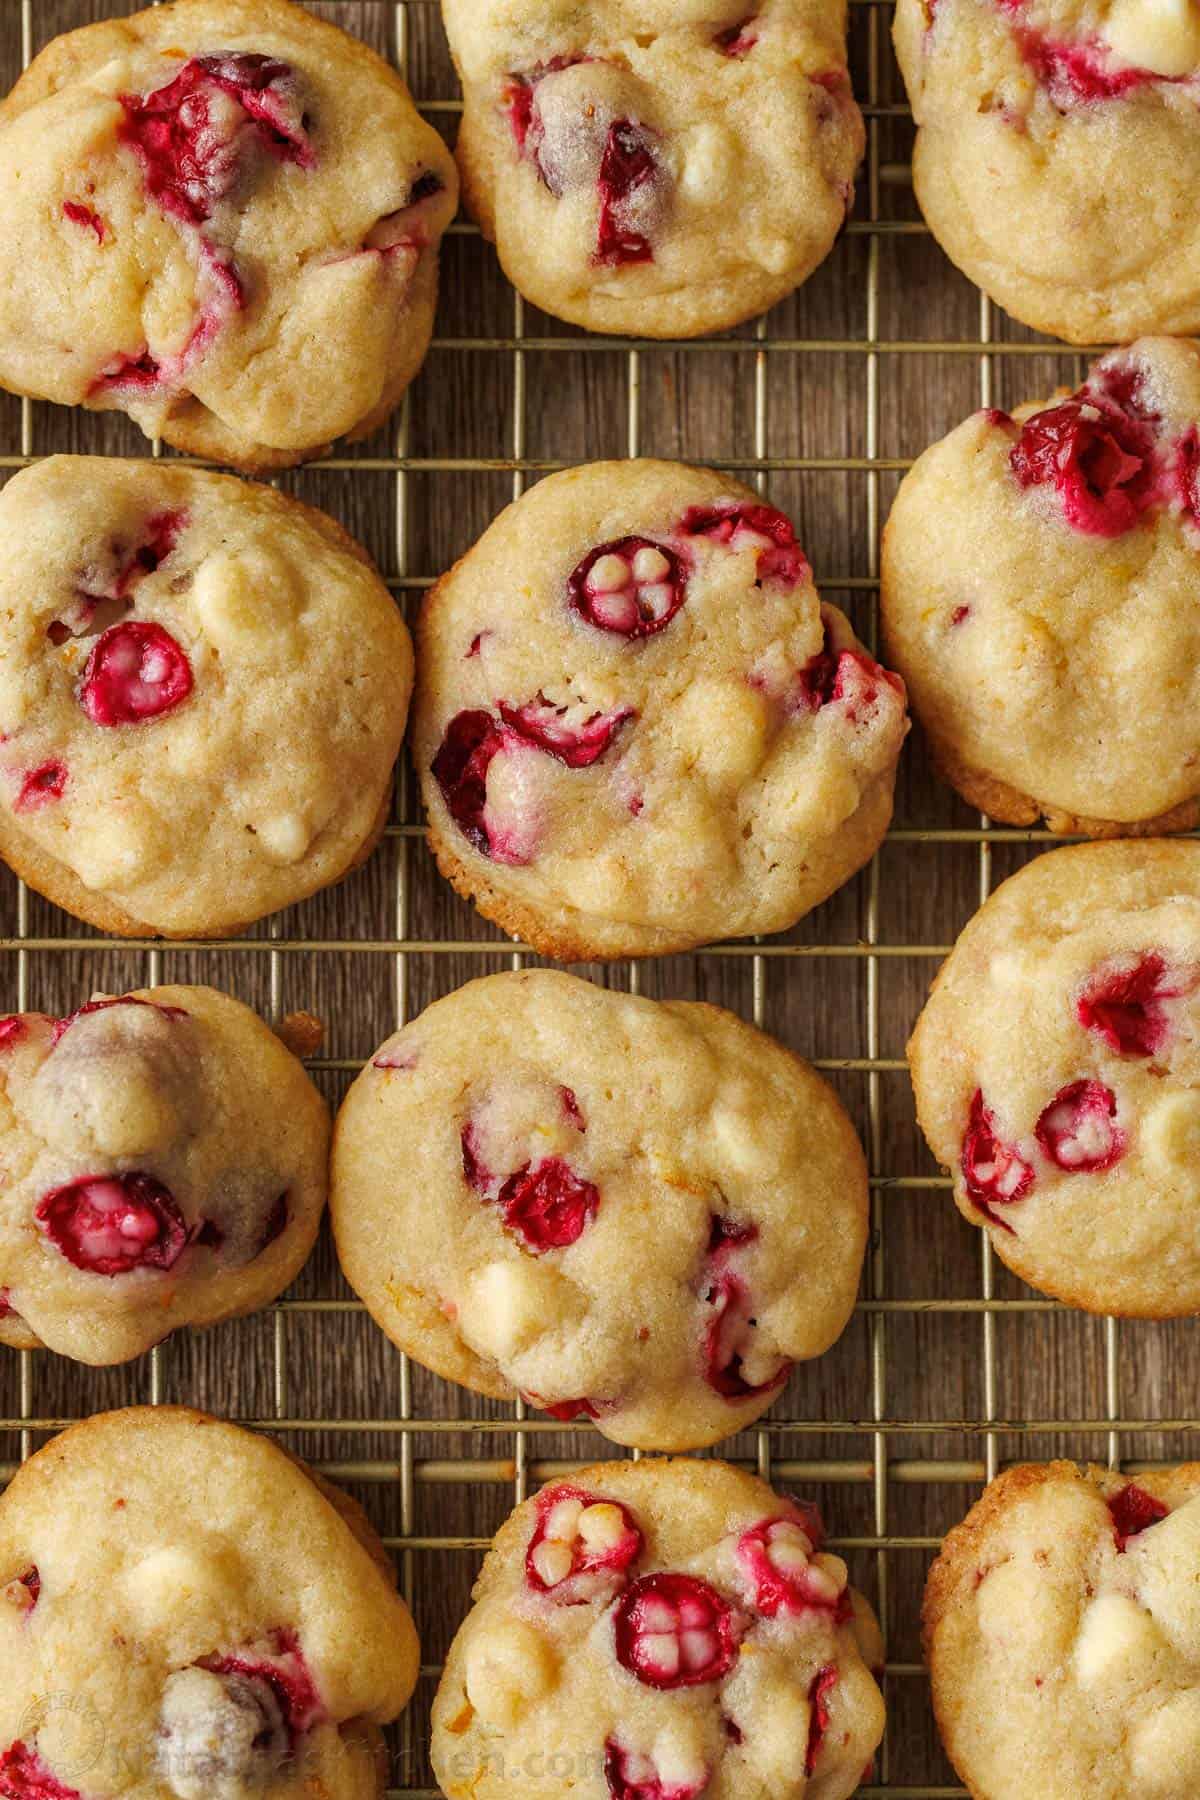 Cranberry white chocolate cookies cooling on a wire rack